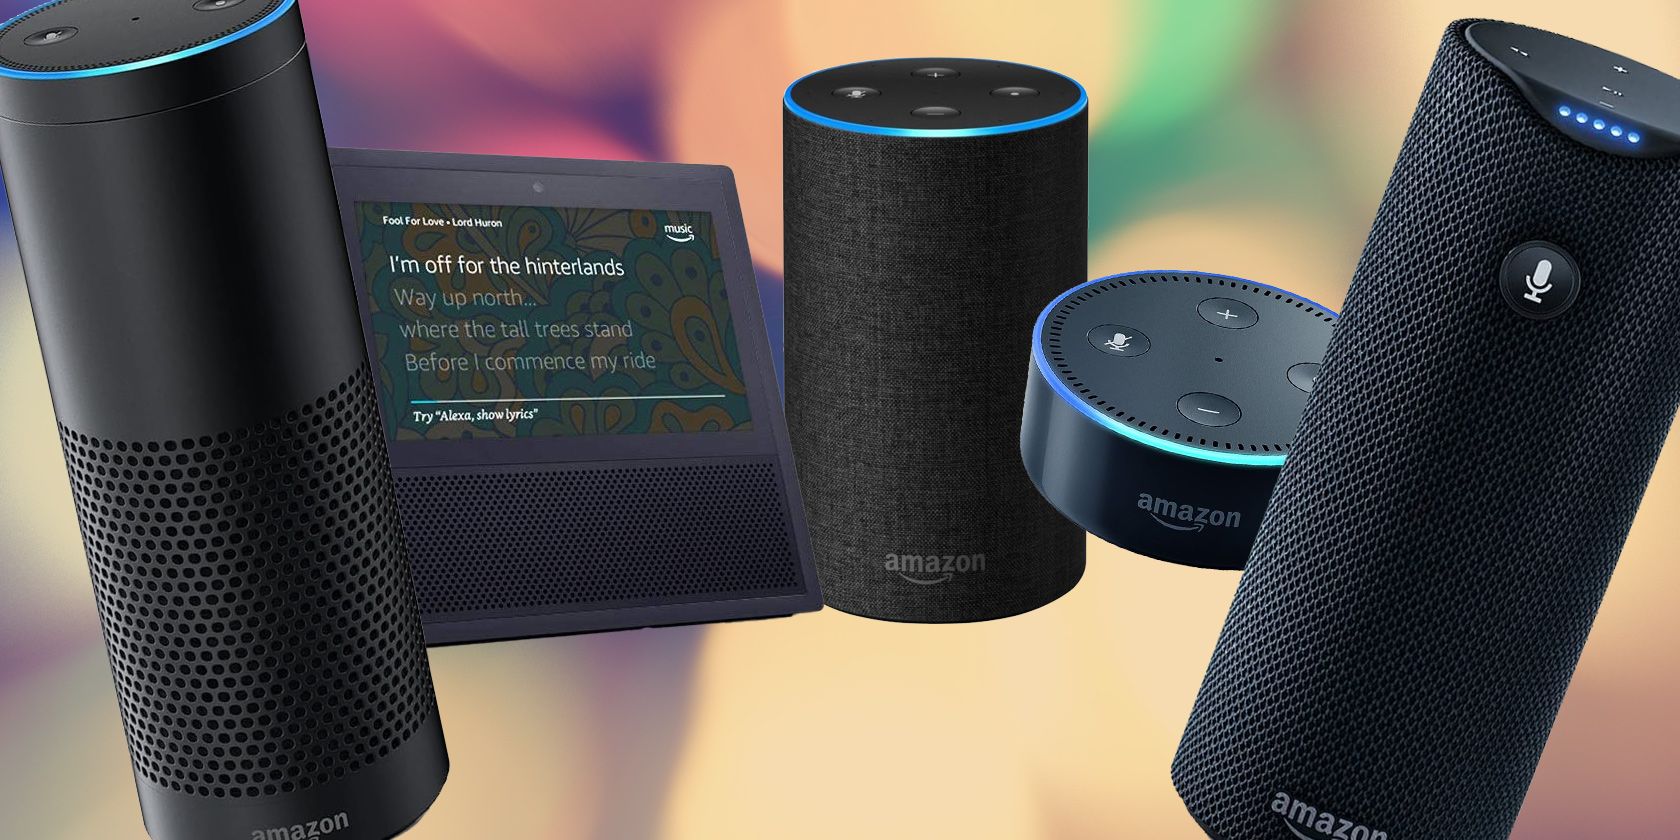 Billy ged mikroskop opladning A Comparison Guide to Amazon Echo Devices: Which One Is Best for You?